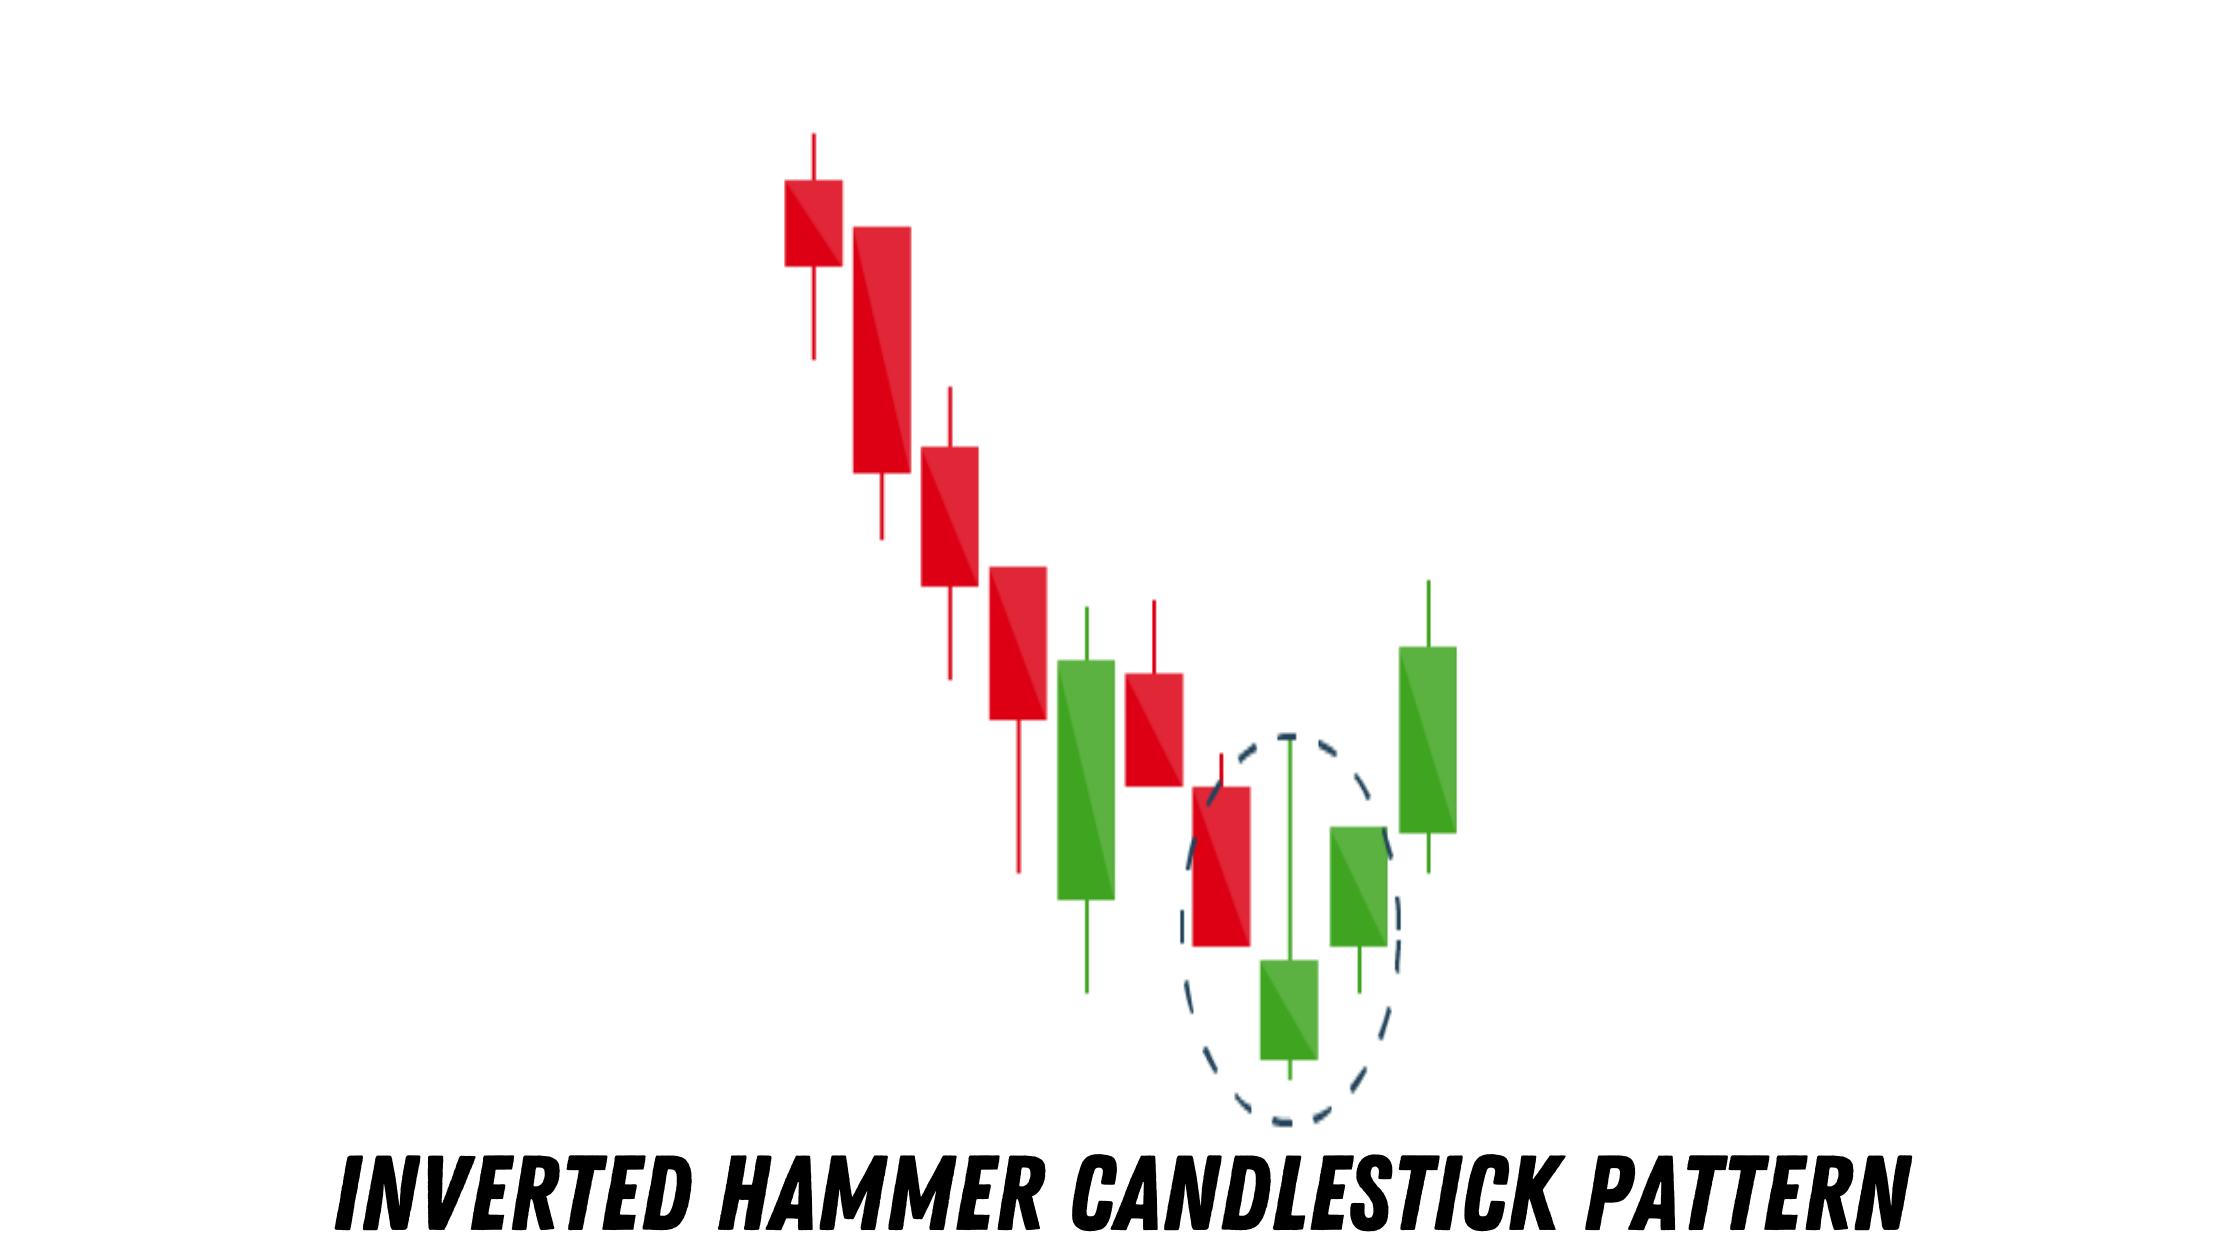 Inverted Hammer Candlestick Pattern: What Is It, and How to Trade Using This Pattern?